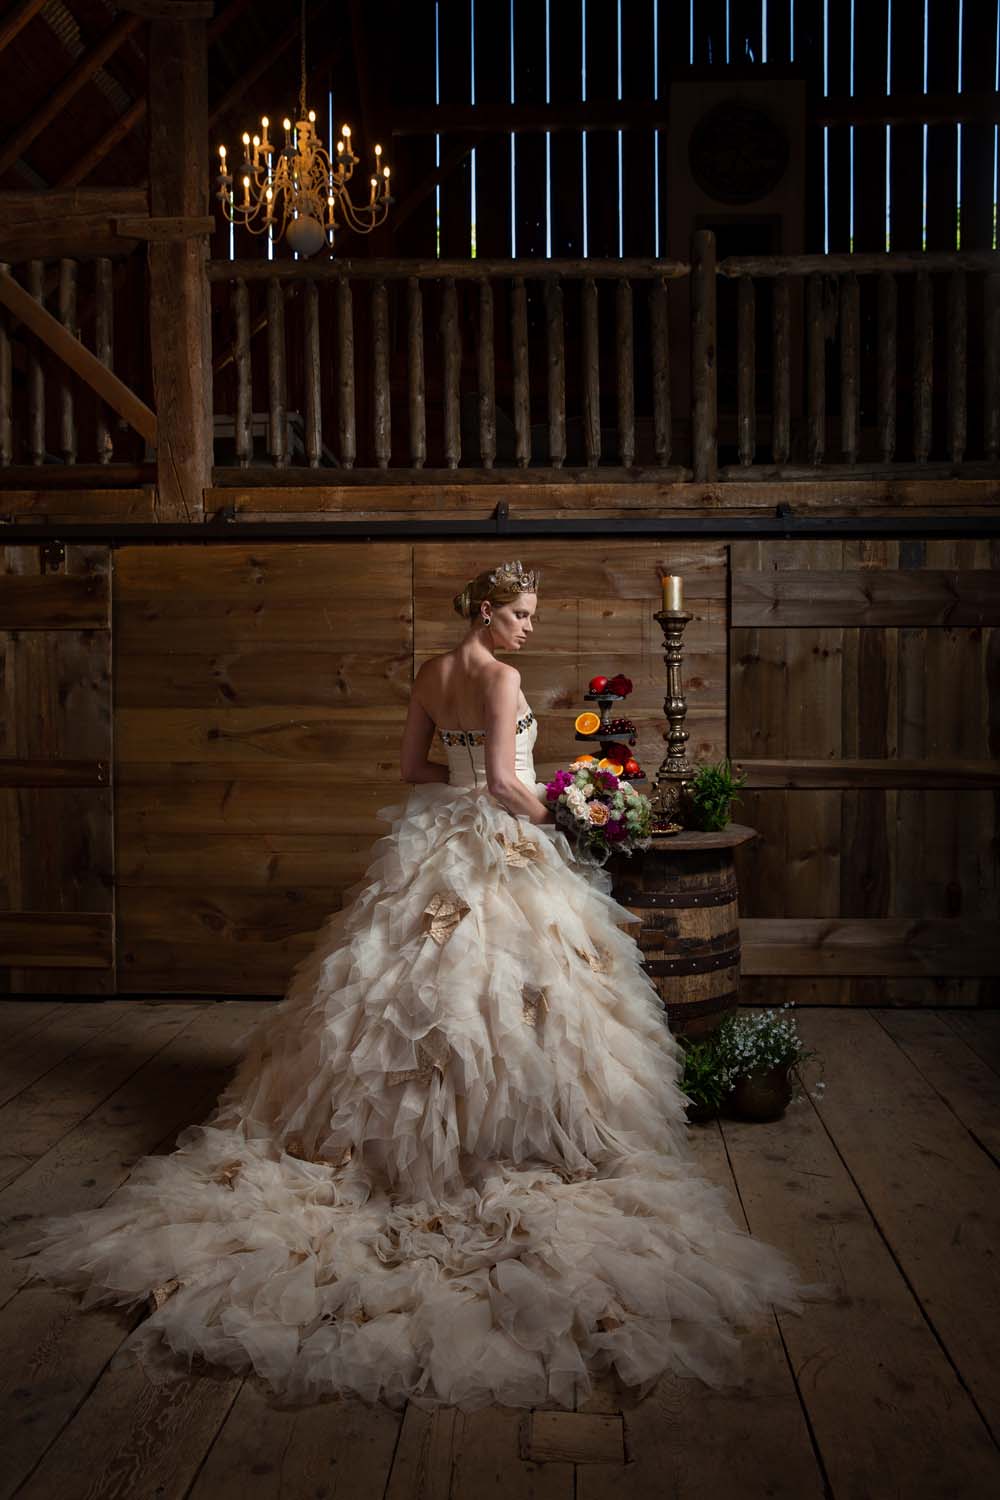 This Styled Shoot Was Inspired By Medieval Royalty - Bride